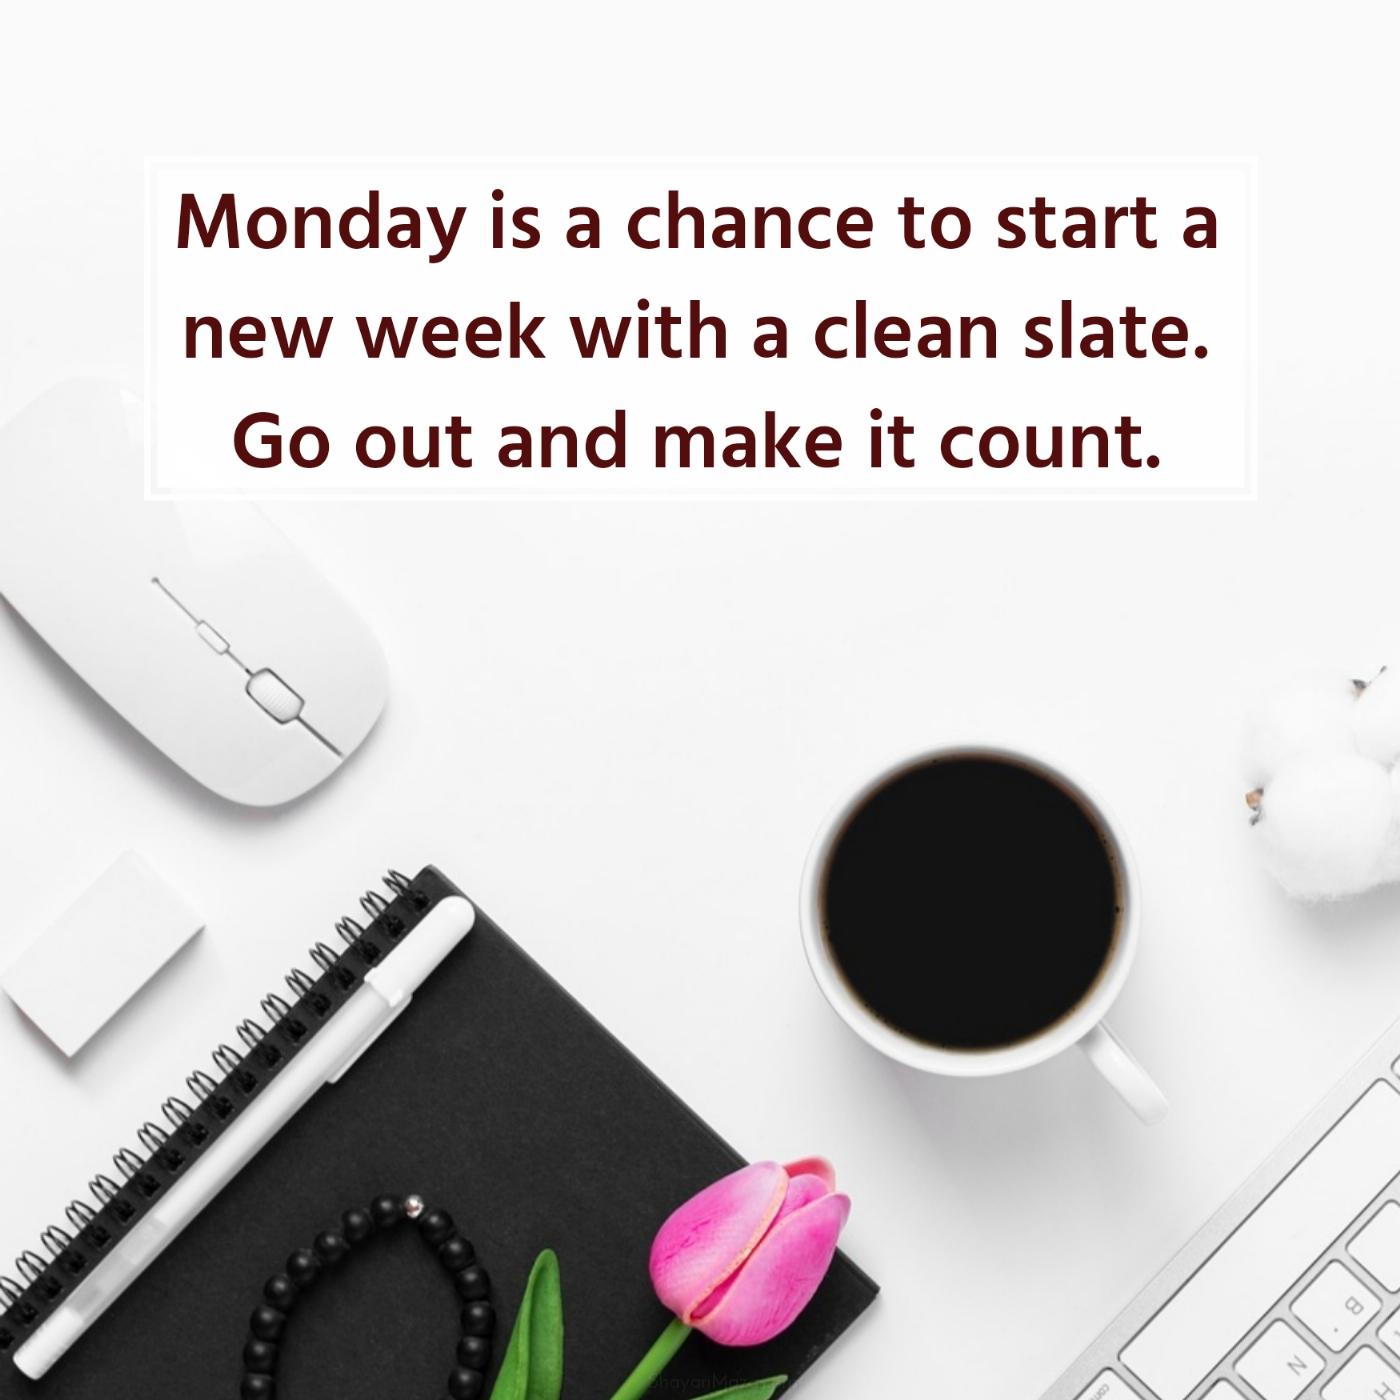 Monday is a chance to start a new week with a clean slate